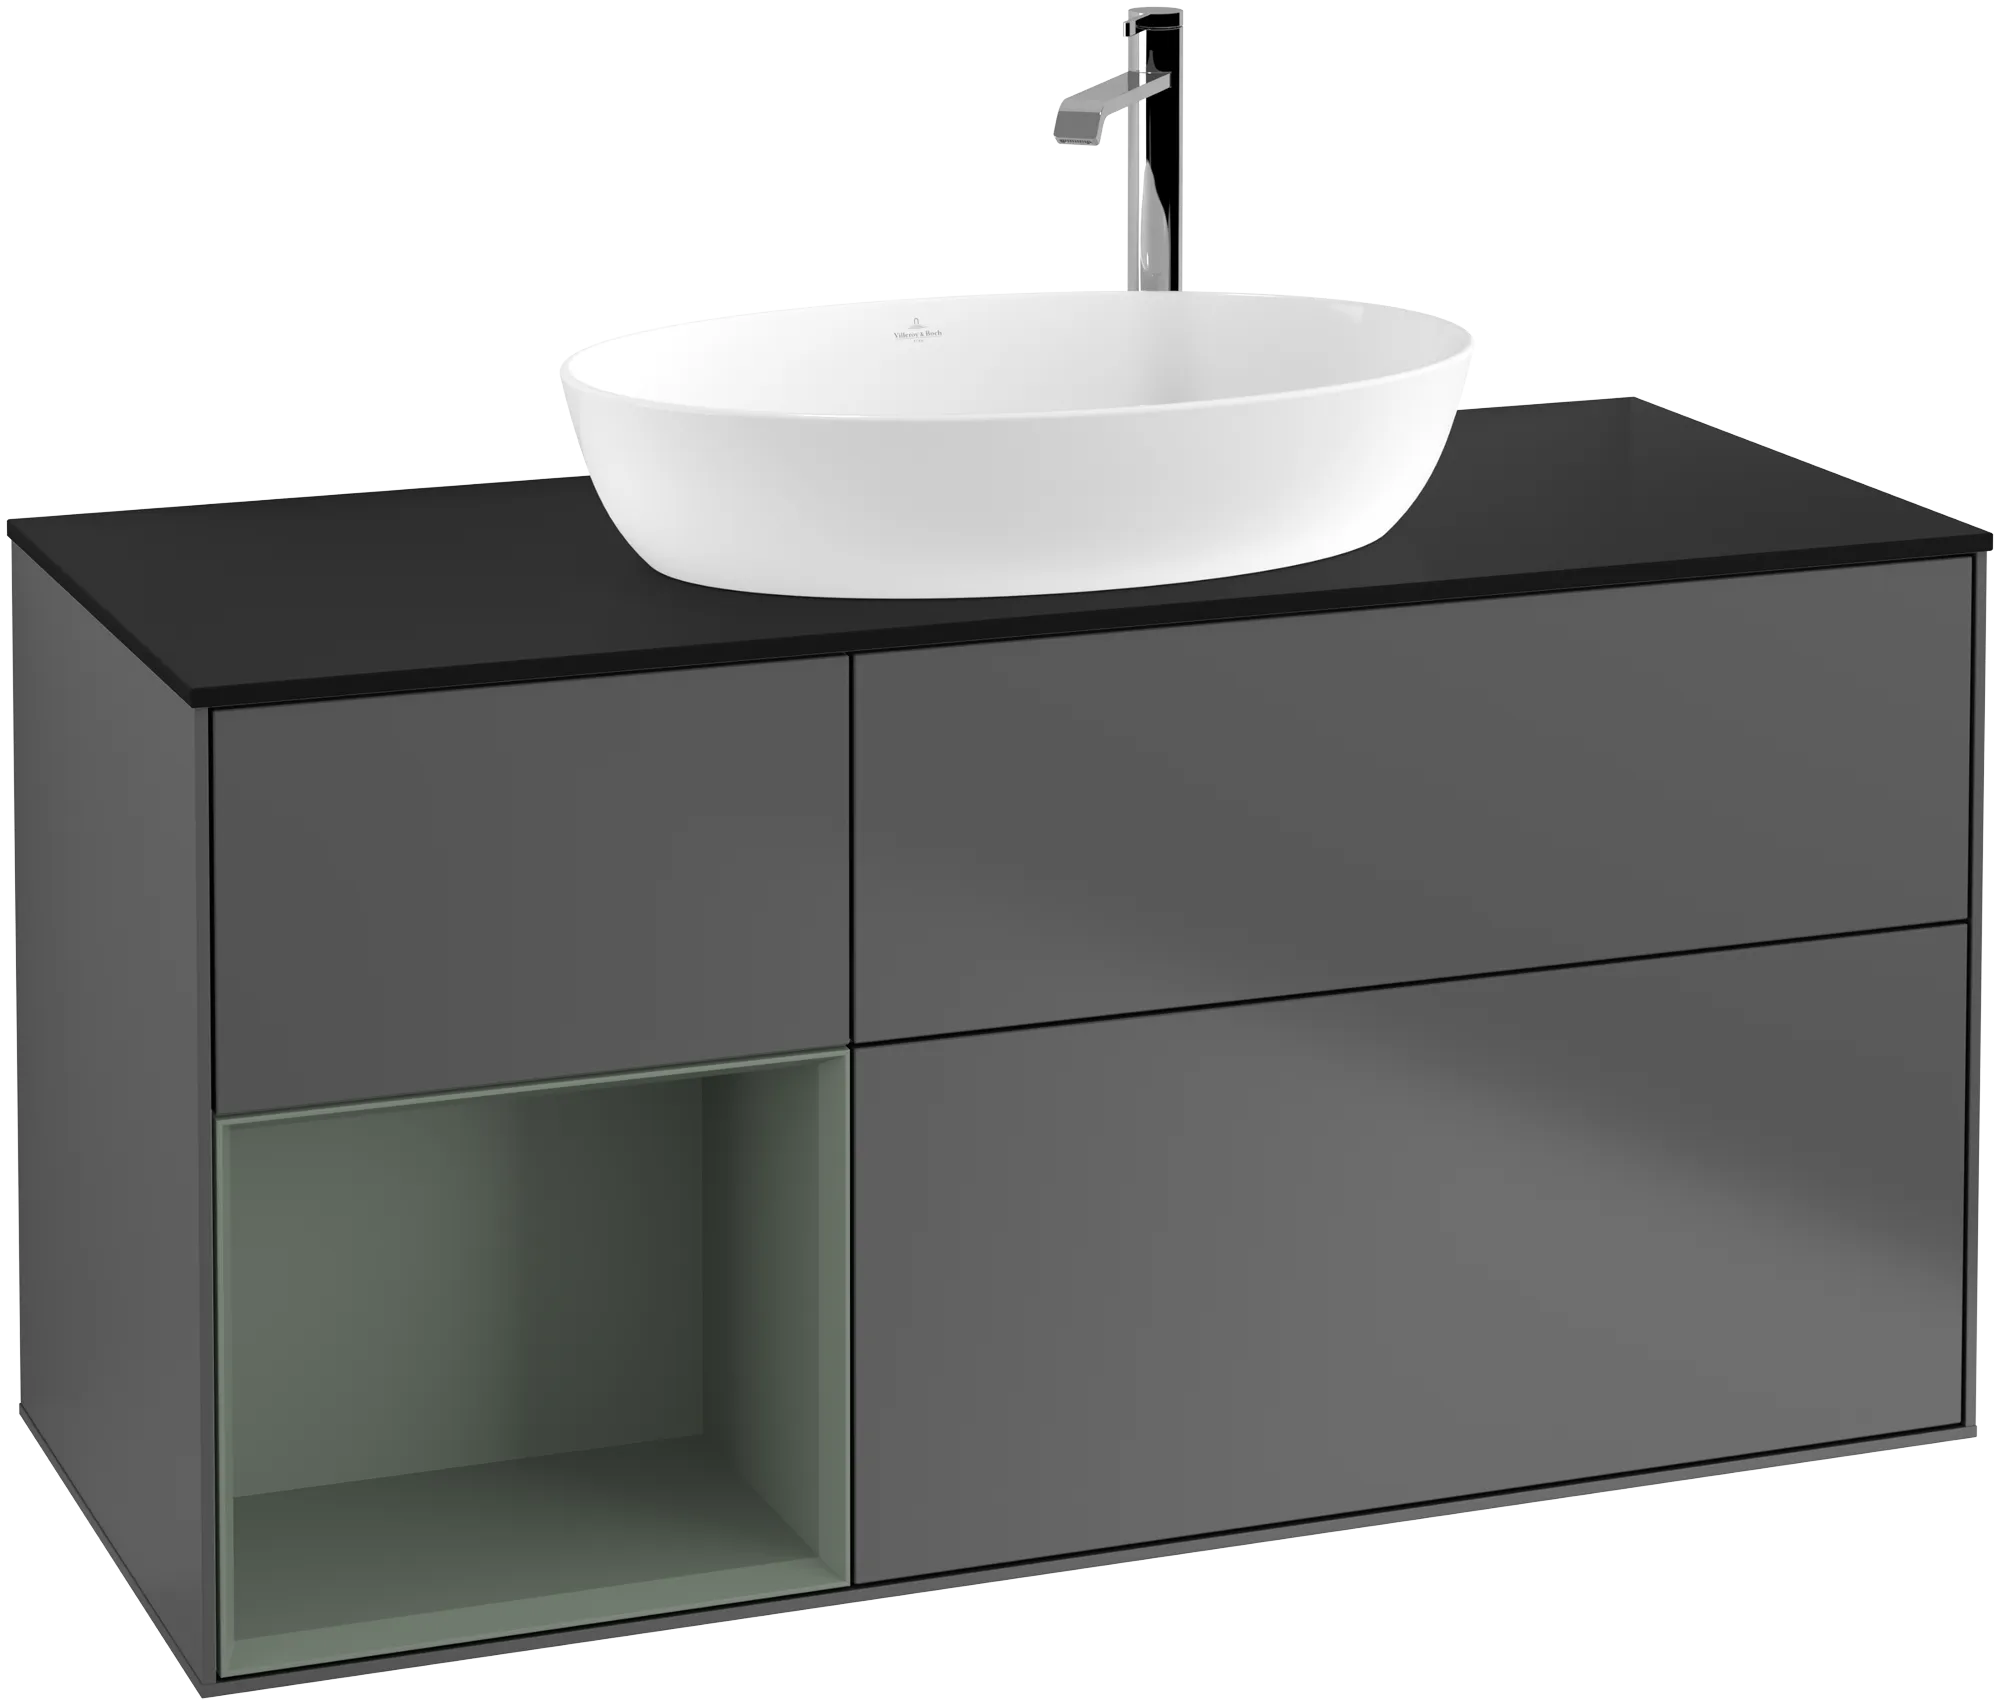 Obrázek VILLEROY BOCH Finion Vanity unit, with lighting, 3 pull-out compartments, 1200 x 603 x 501 mm, Anthracite Matt Lacquer / Olive Matt Lacquer / Glass Black Matt #G942GMGK